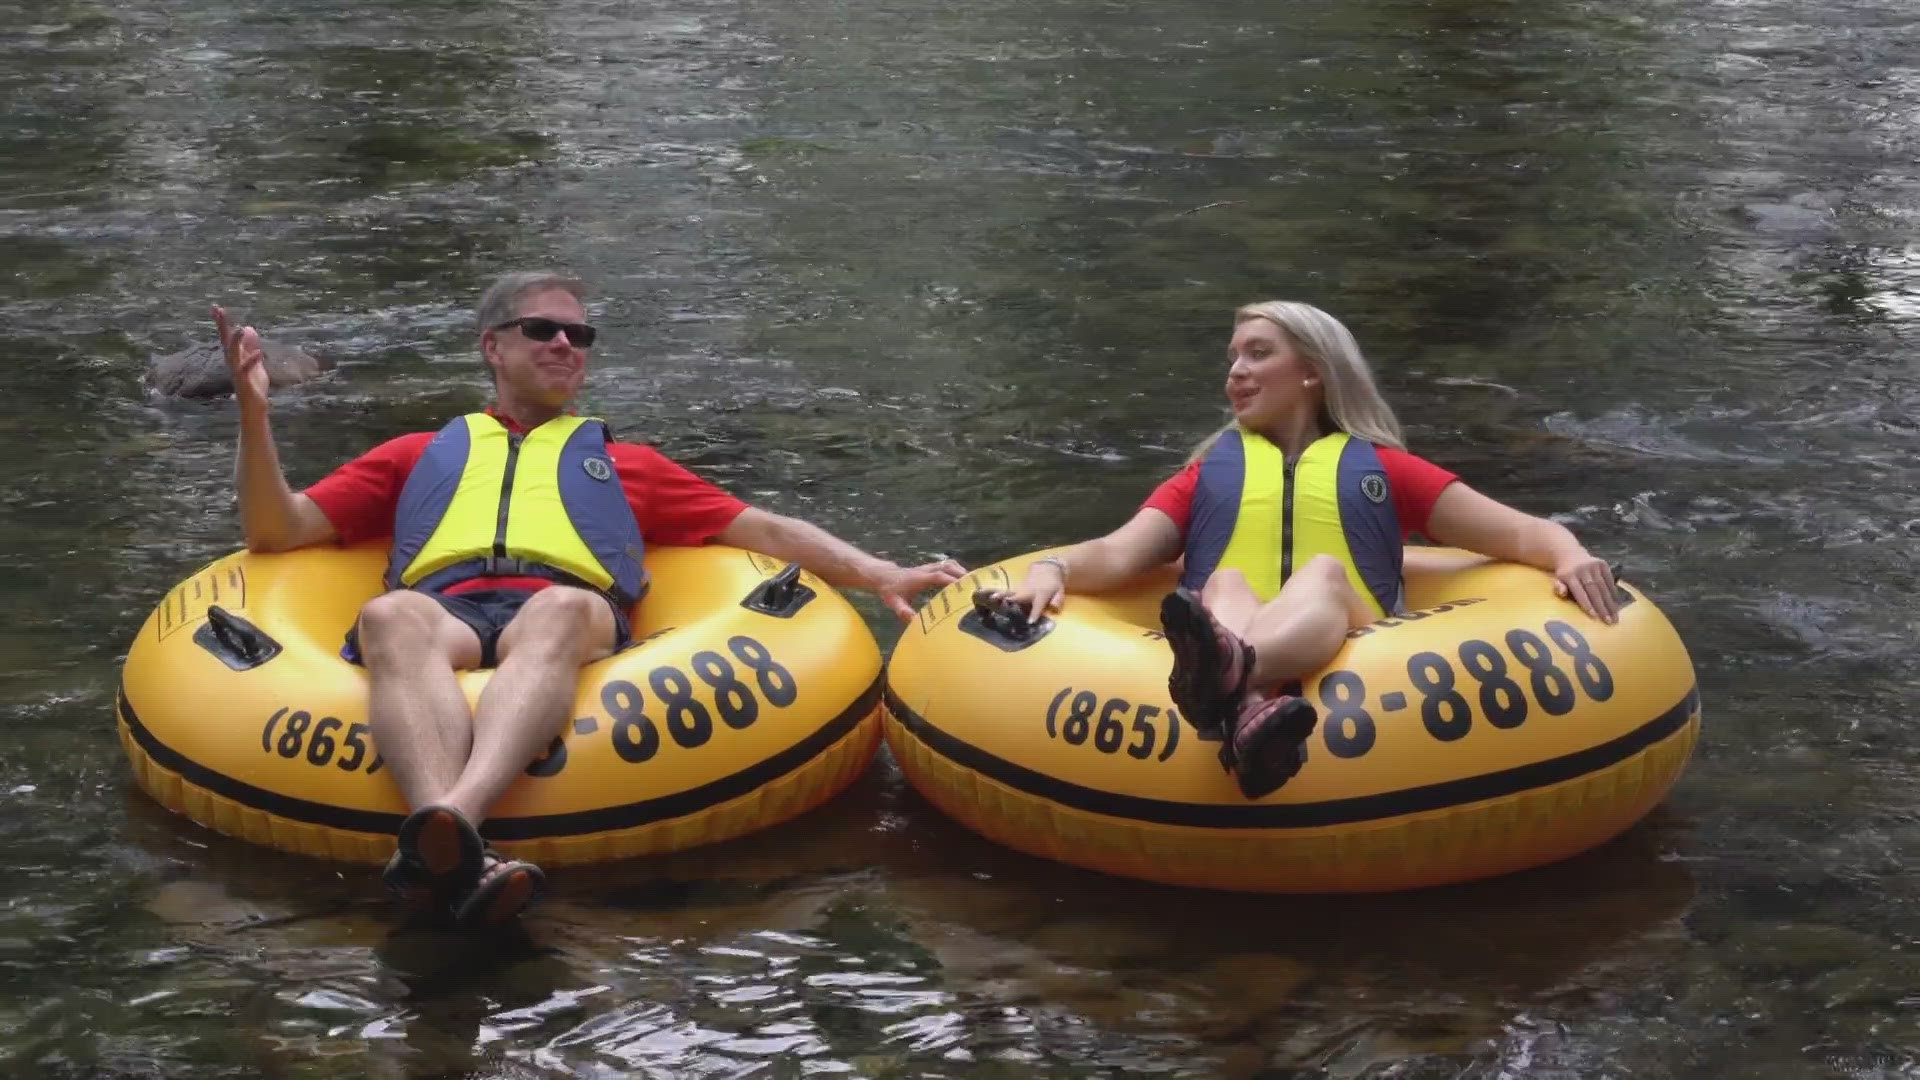 Todd Howell and Katie Inman took a plunge in the river while sharing the sights and sounds.